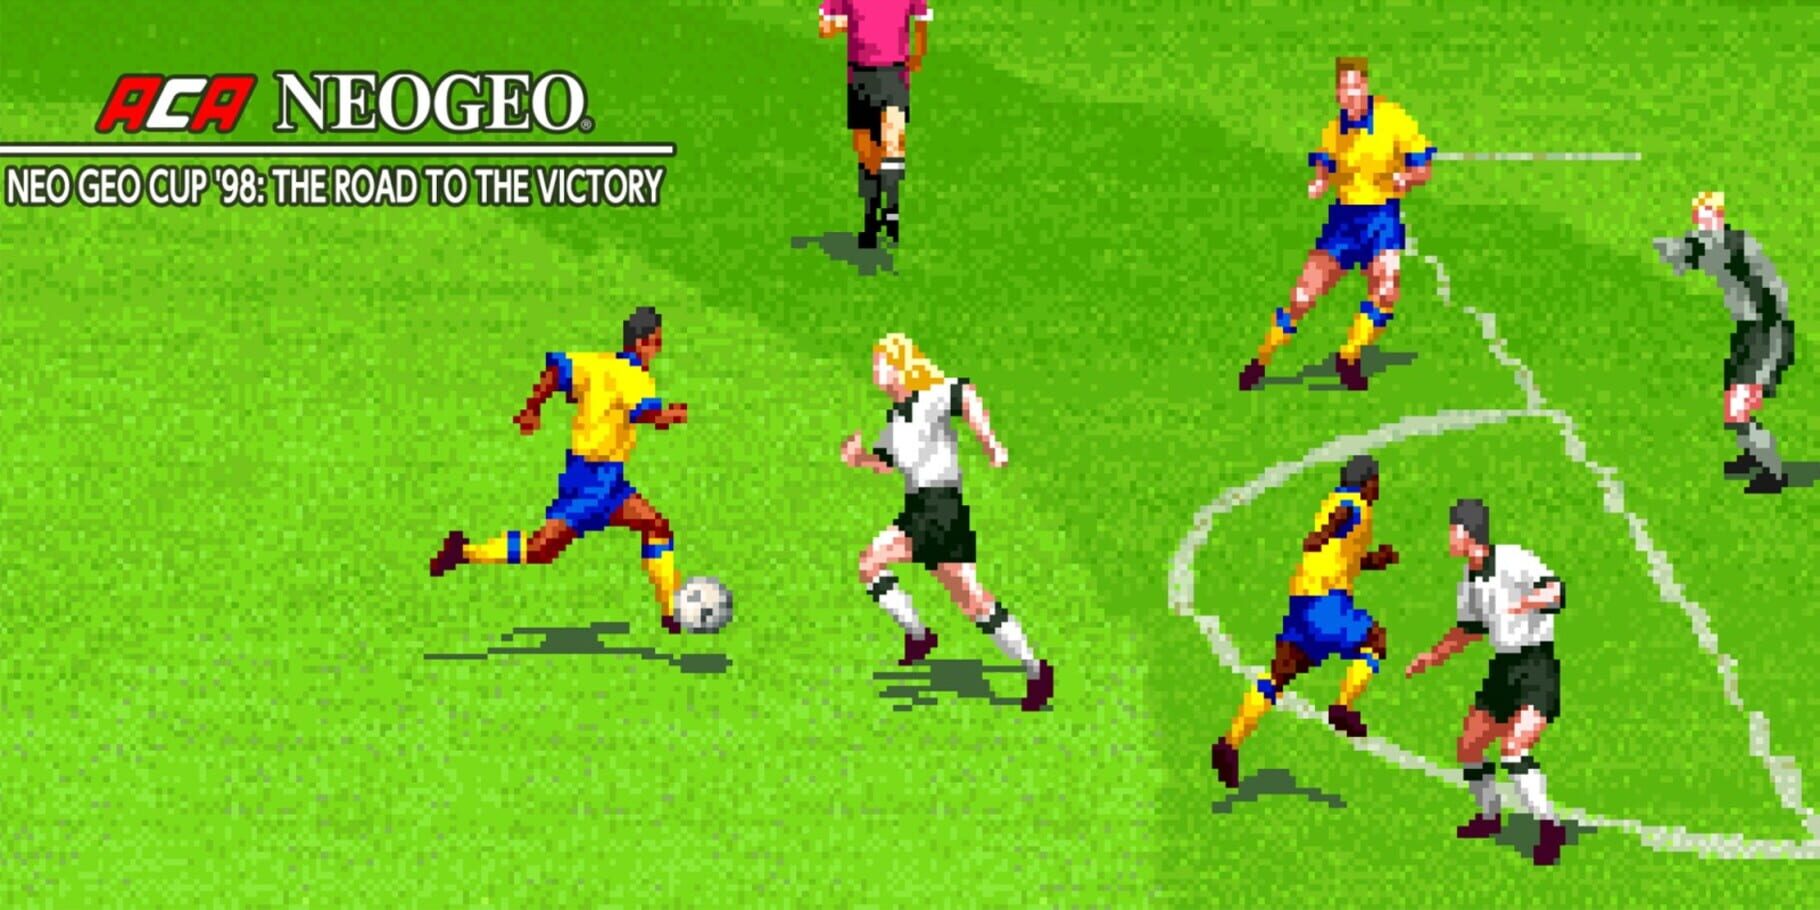 ACA Neo Geo: Neo Geo Cup '98 - The Road to the Victory artwork